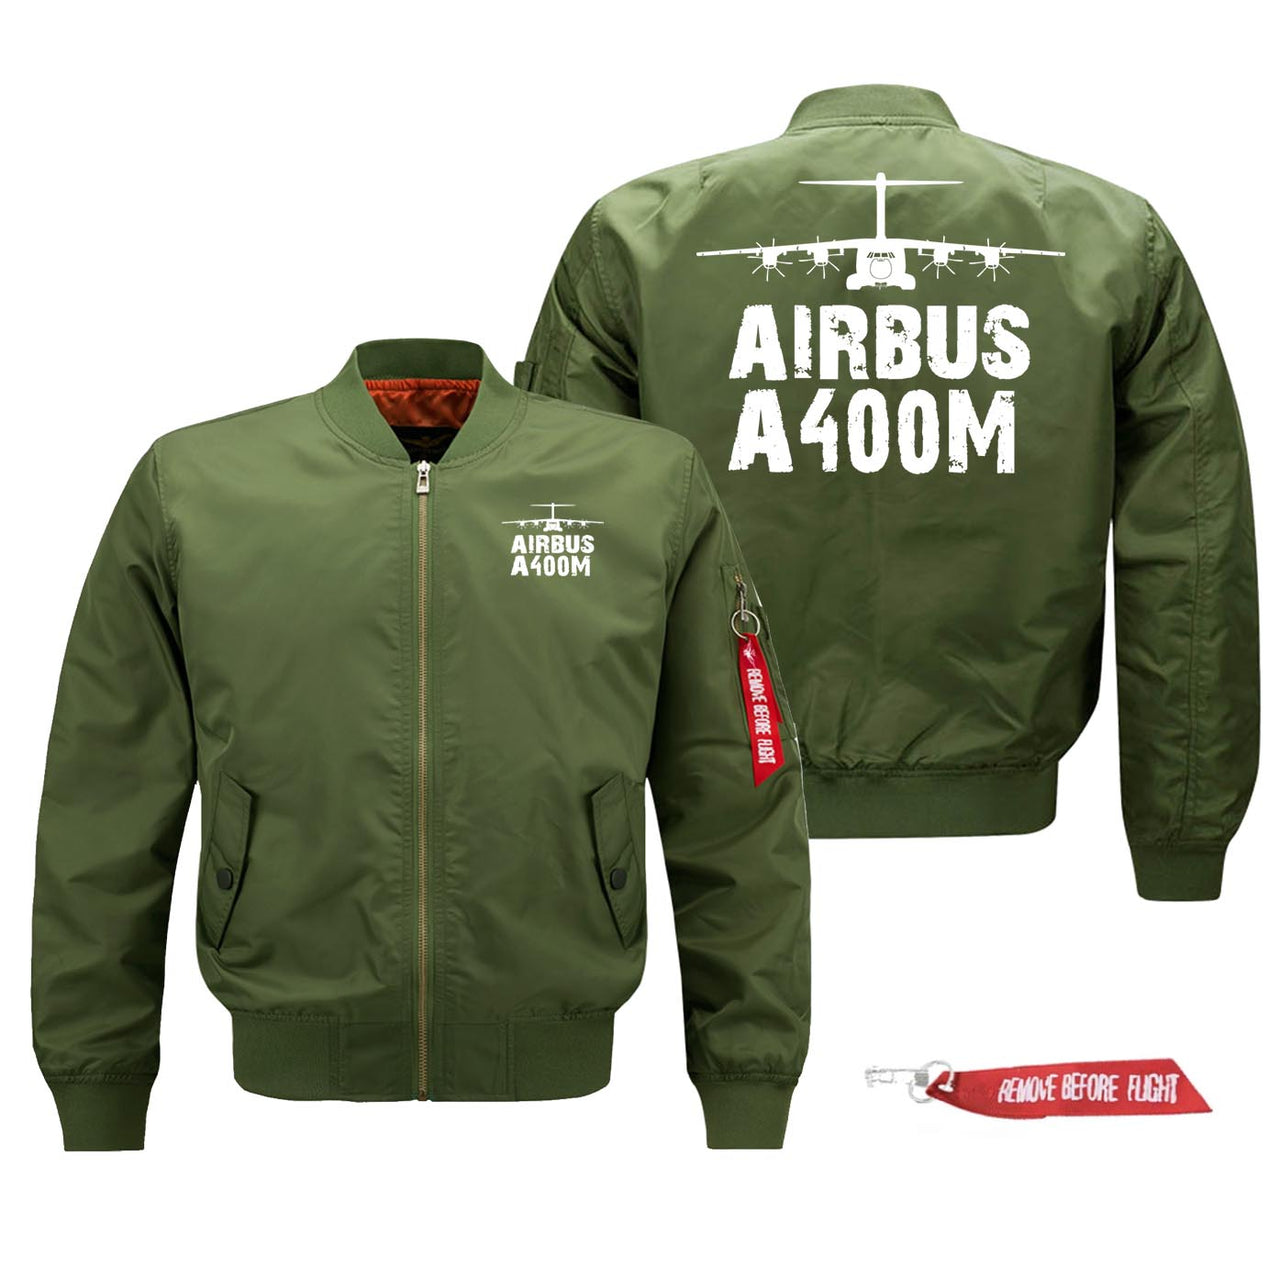 Airbus A400M Silhouette & Designed Pilot Jackets (Customizable)